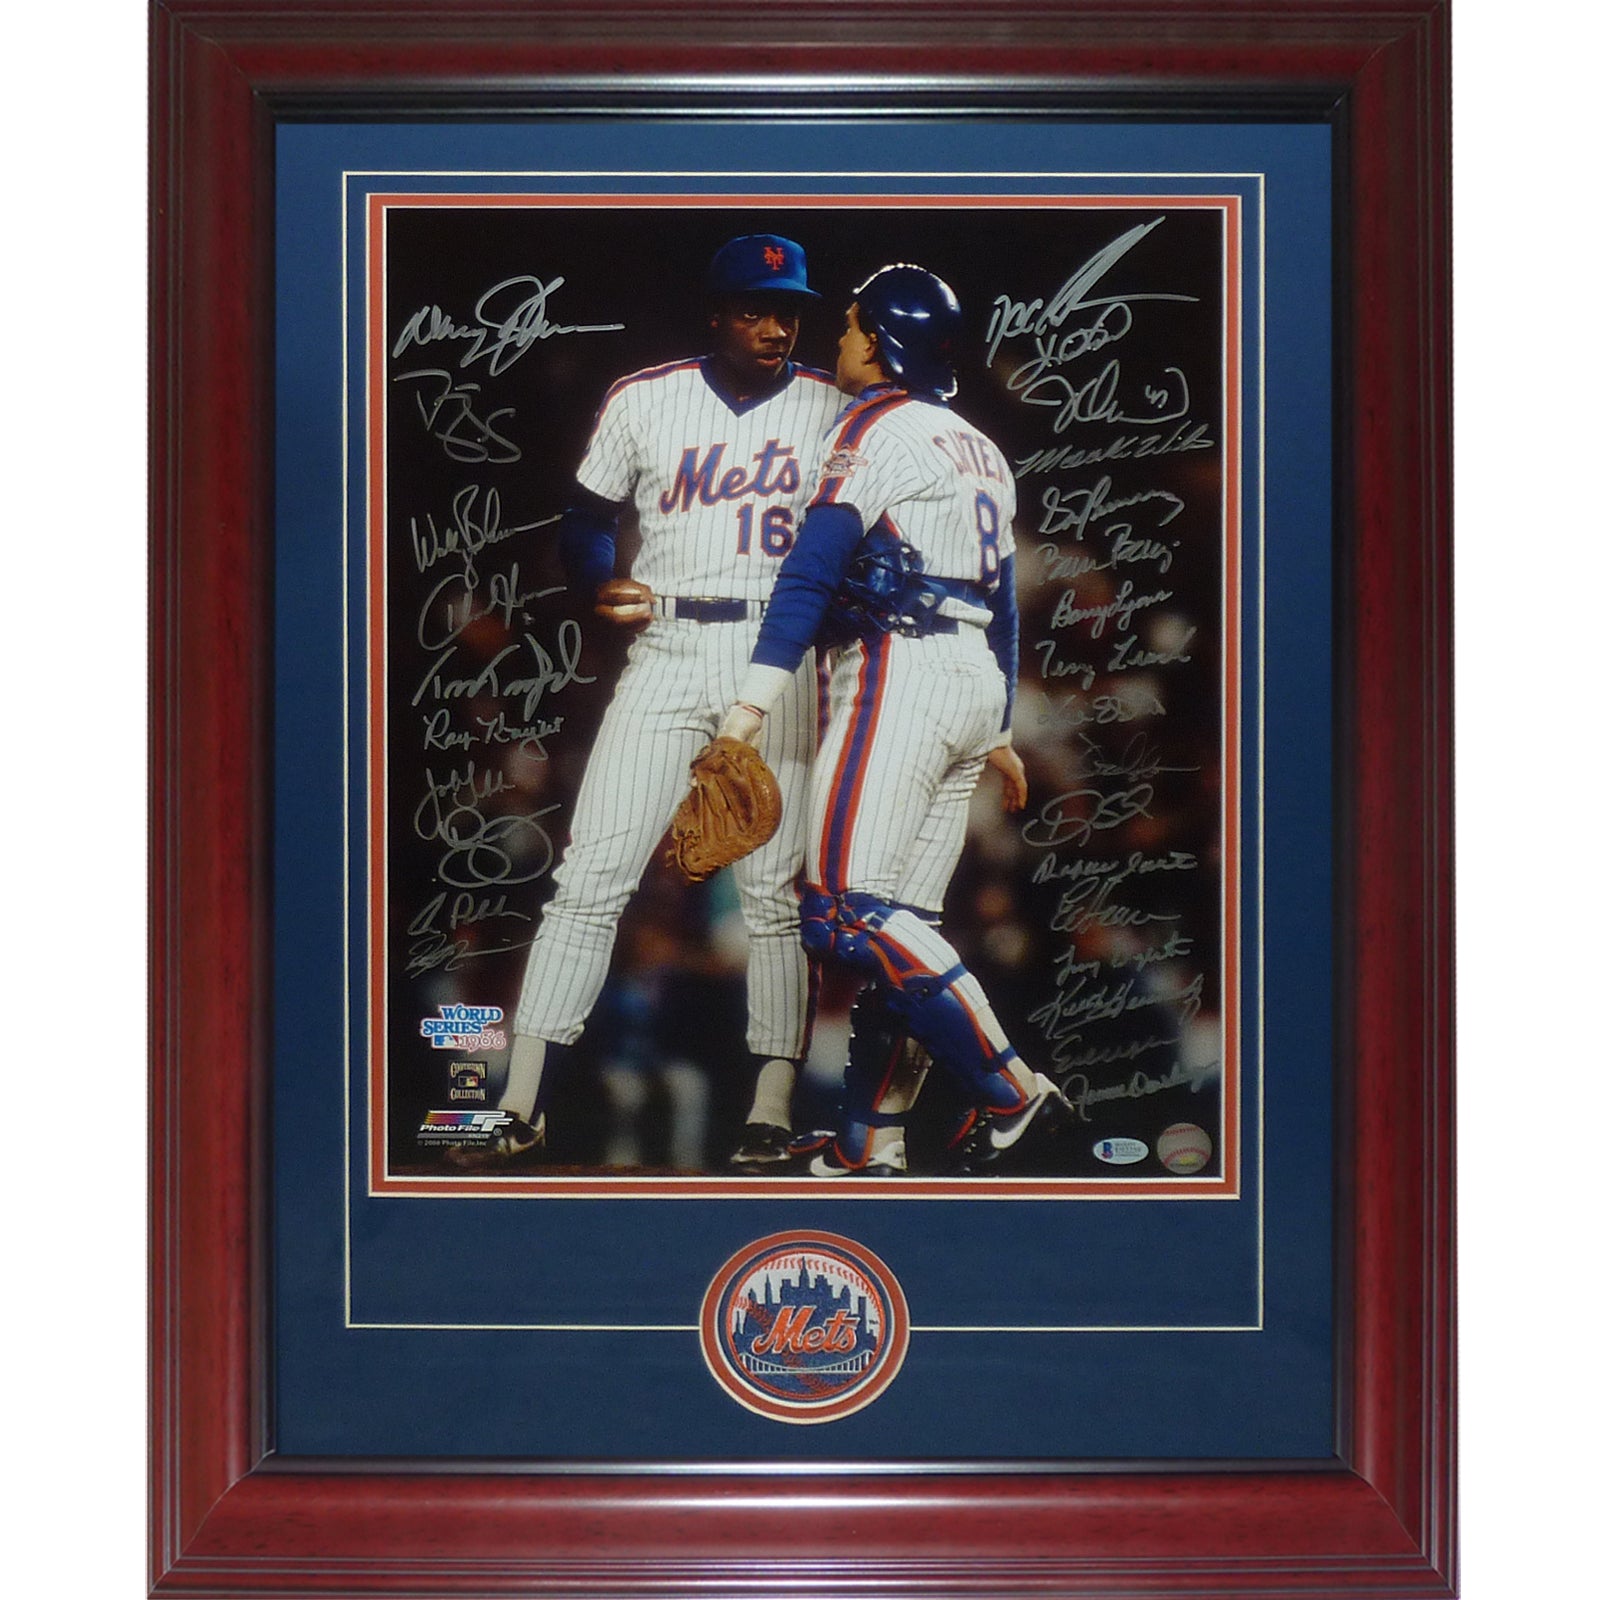 1986 New York Mets Team Autographed (World Series Champs – Gooden and  Carter) Deluxe Framed 16x20 Photo - Beckett Letter